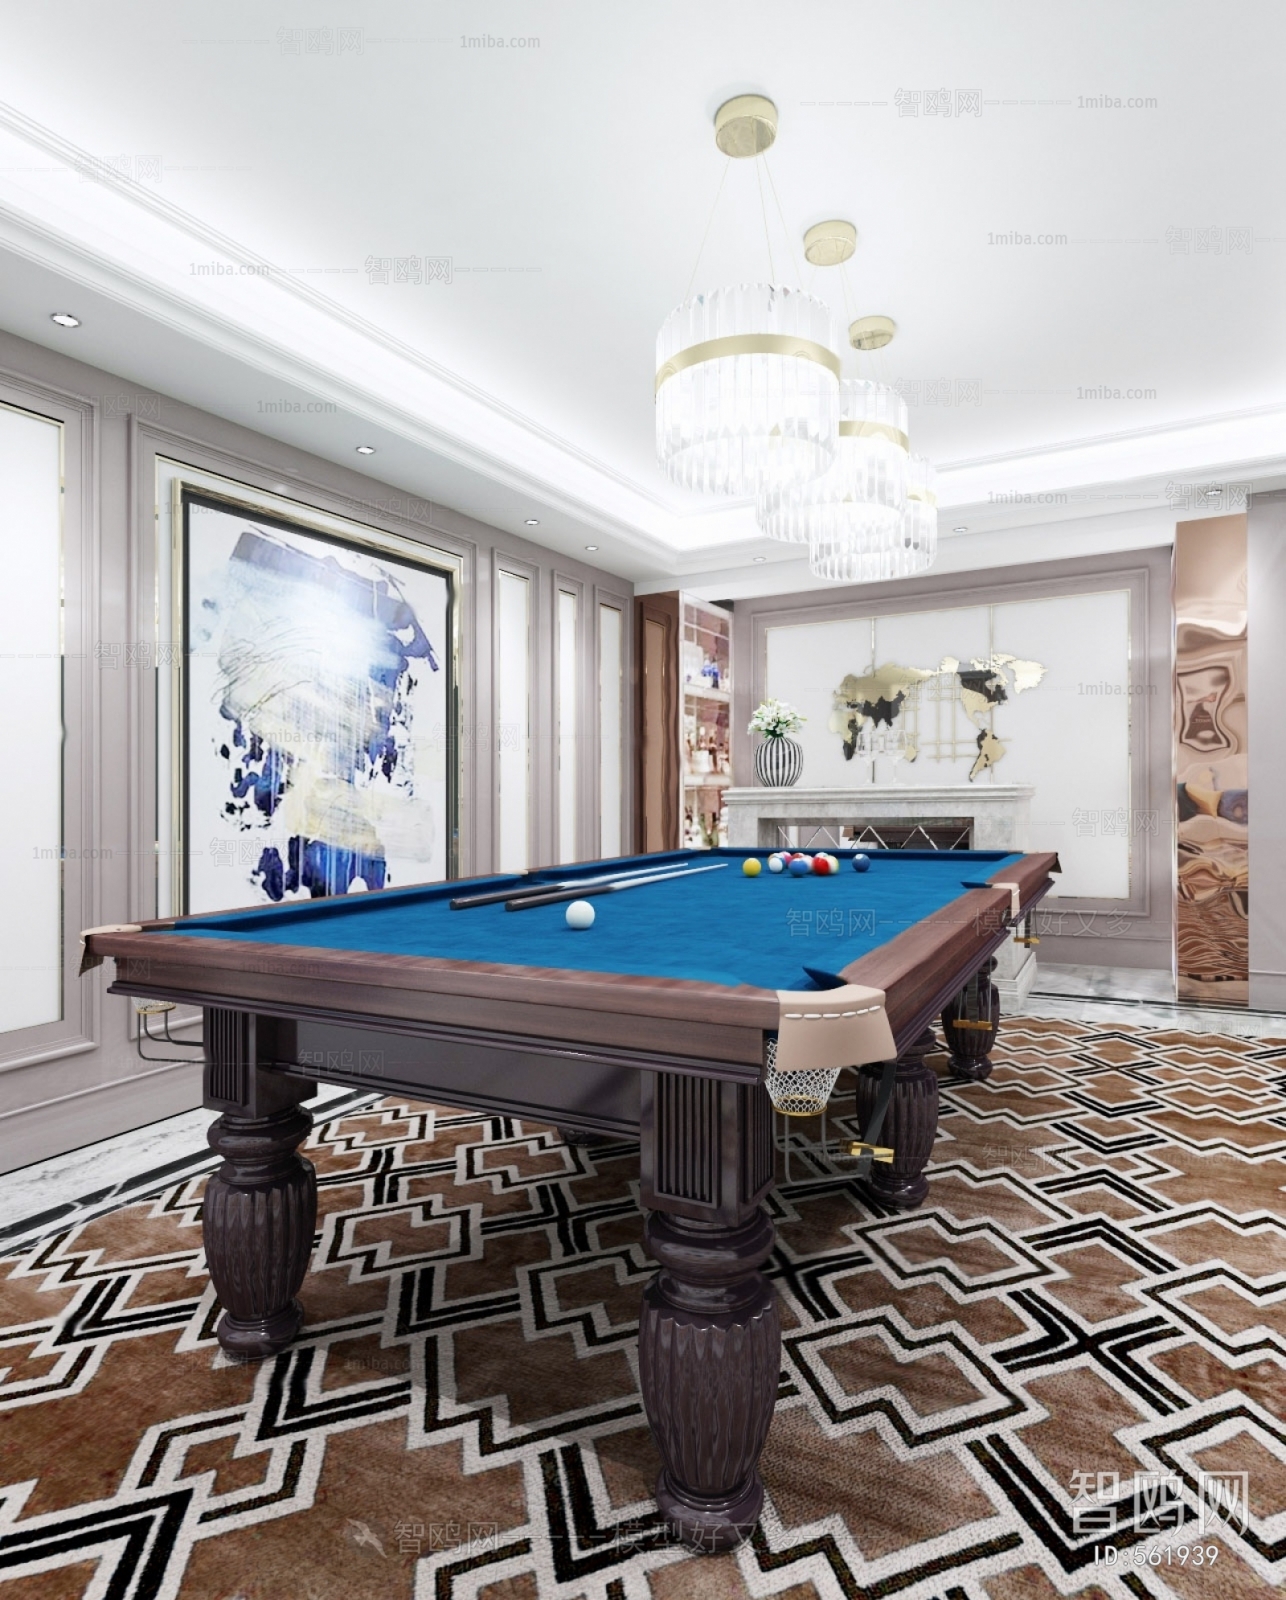 New Classical Style Billiards Room